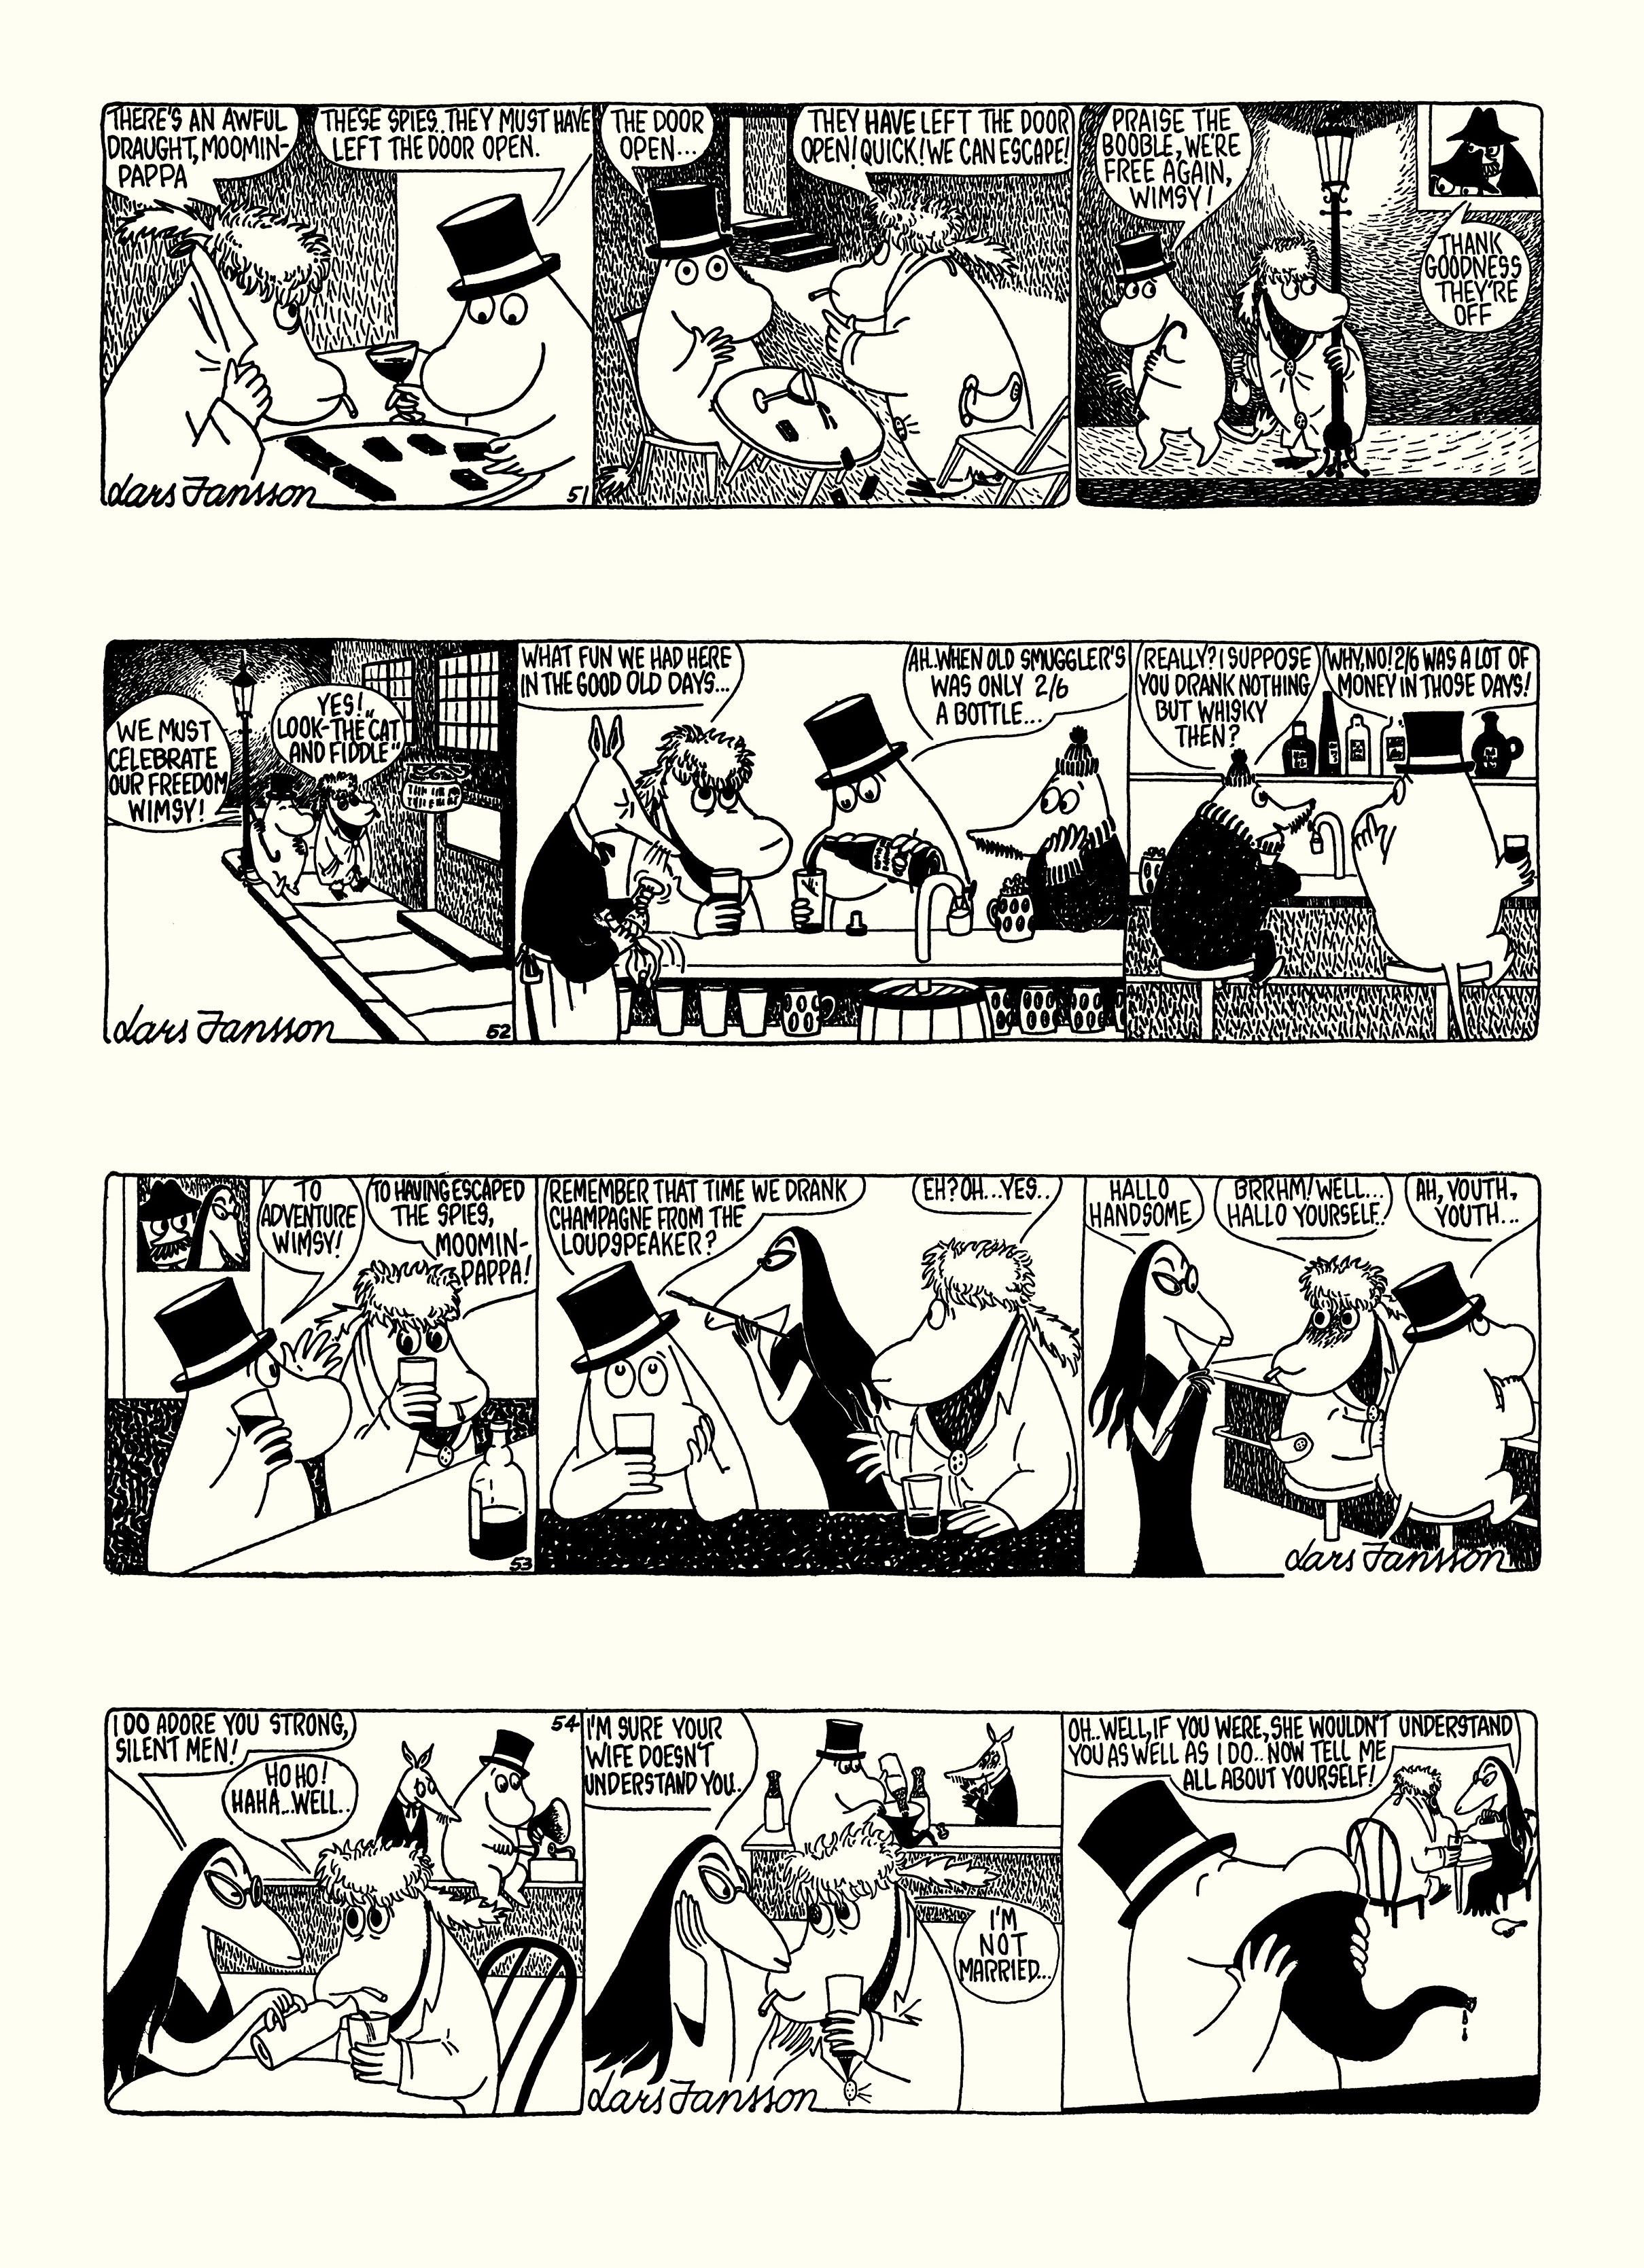 Read online Moomin: The Complete Lars Jansson Comic Strip comic -  Issue # TPB 6 - 60